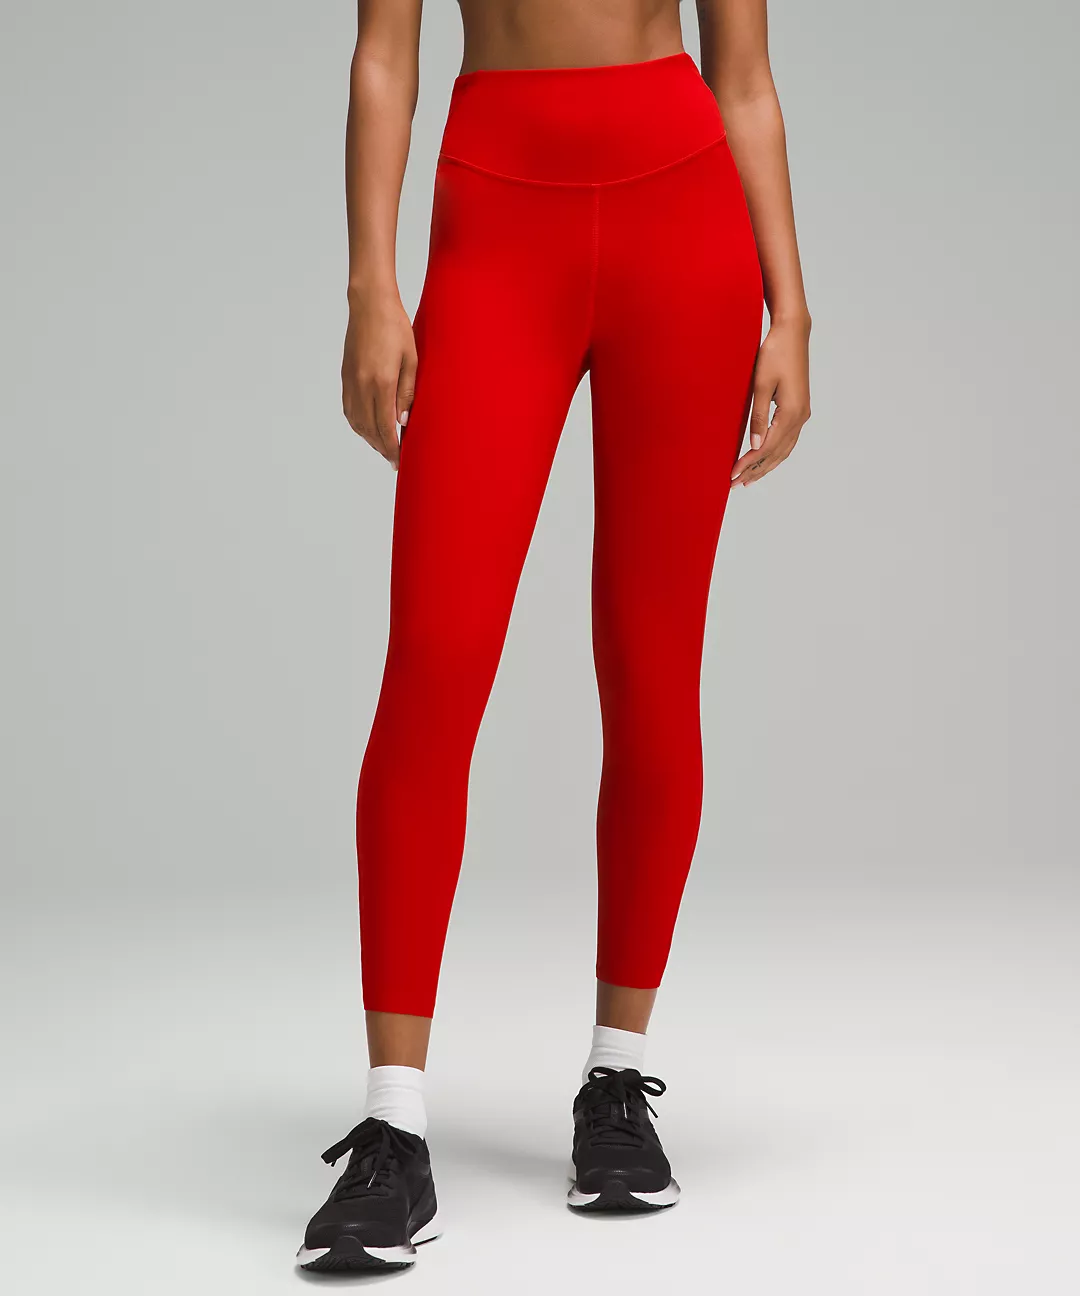 How To Tell What Lululemon Leggings You Have? – solowomen